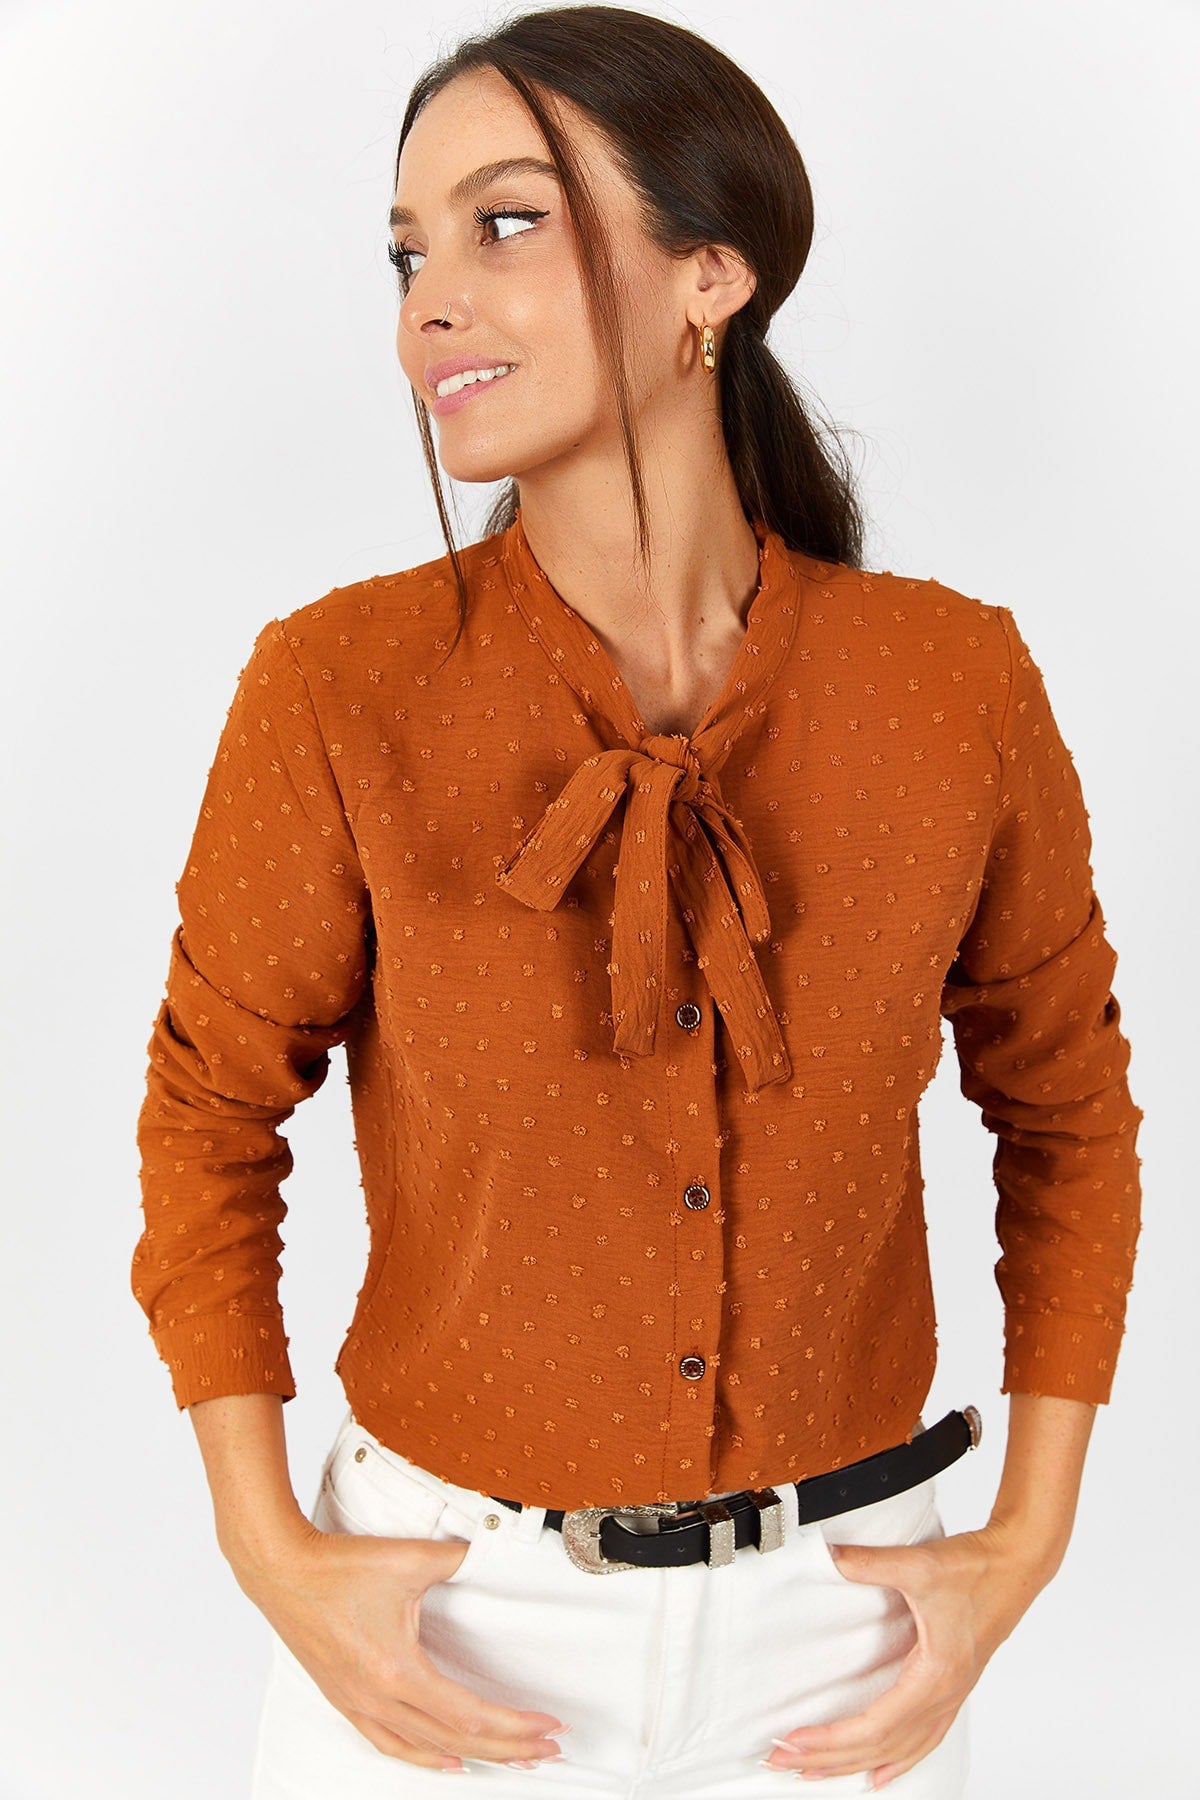 Female Camel collar connected patterned shirt ARM-20K001150